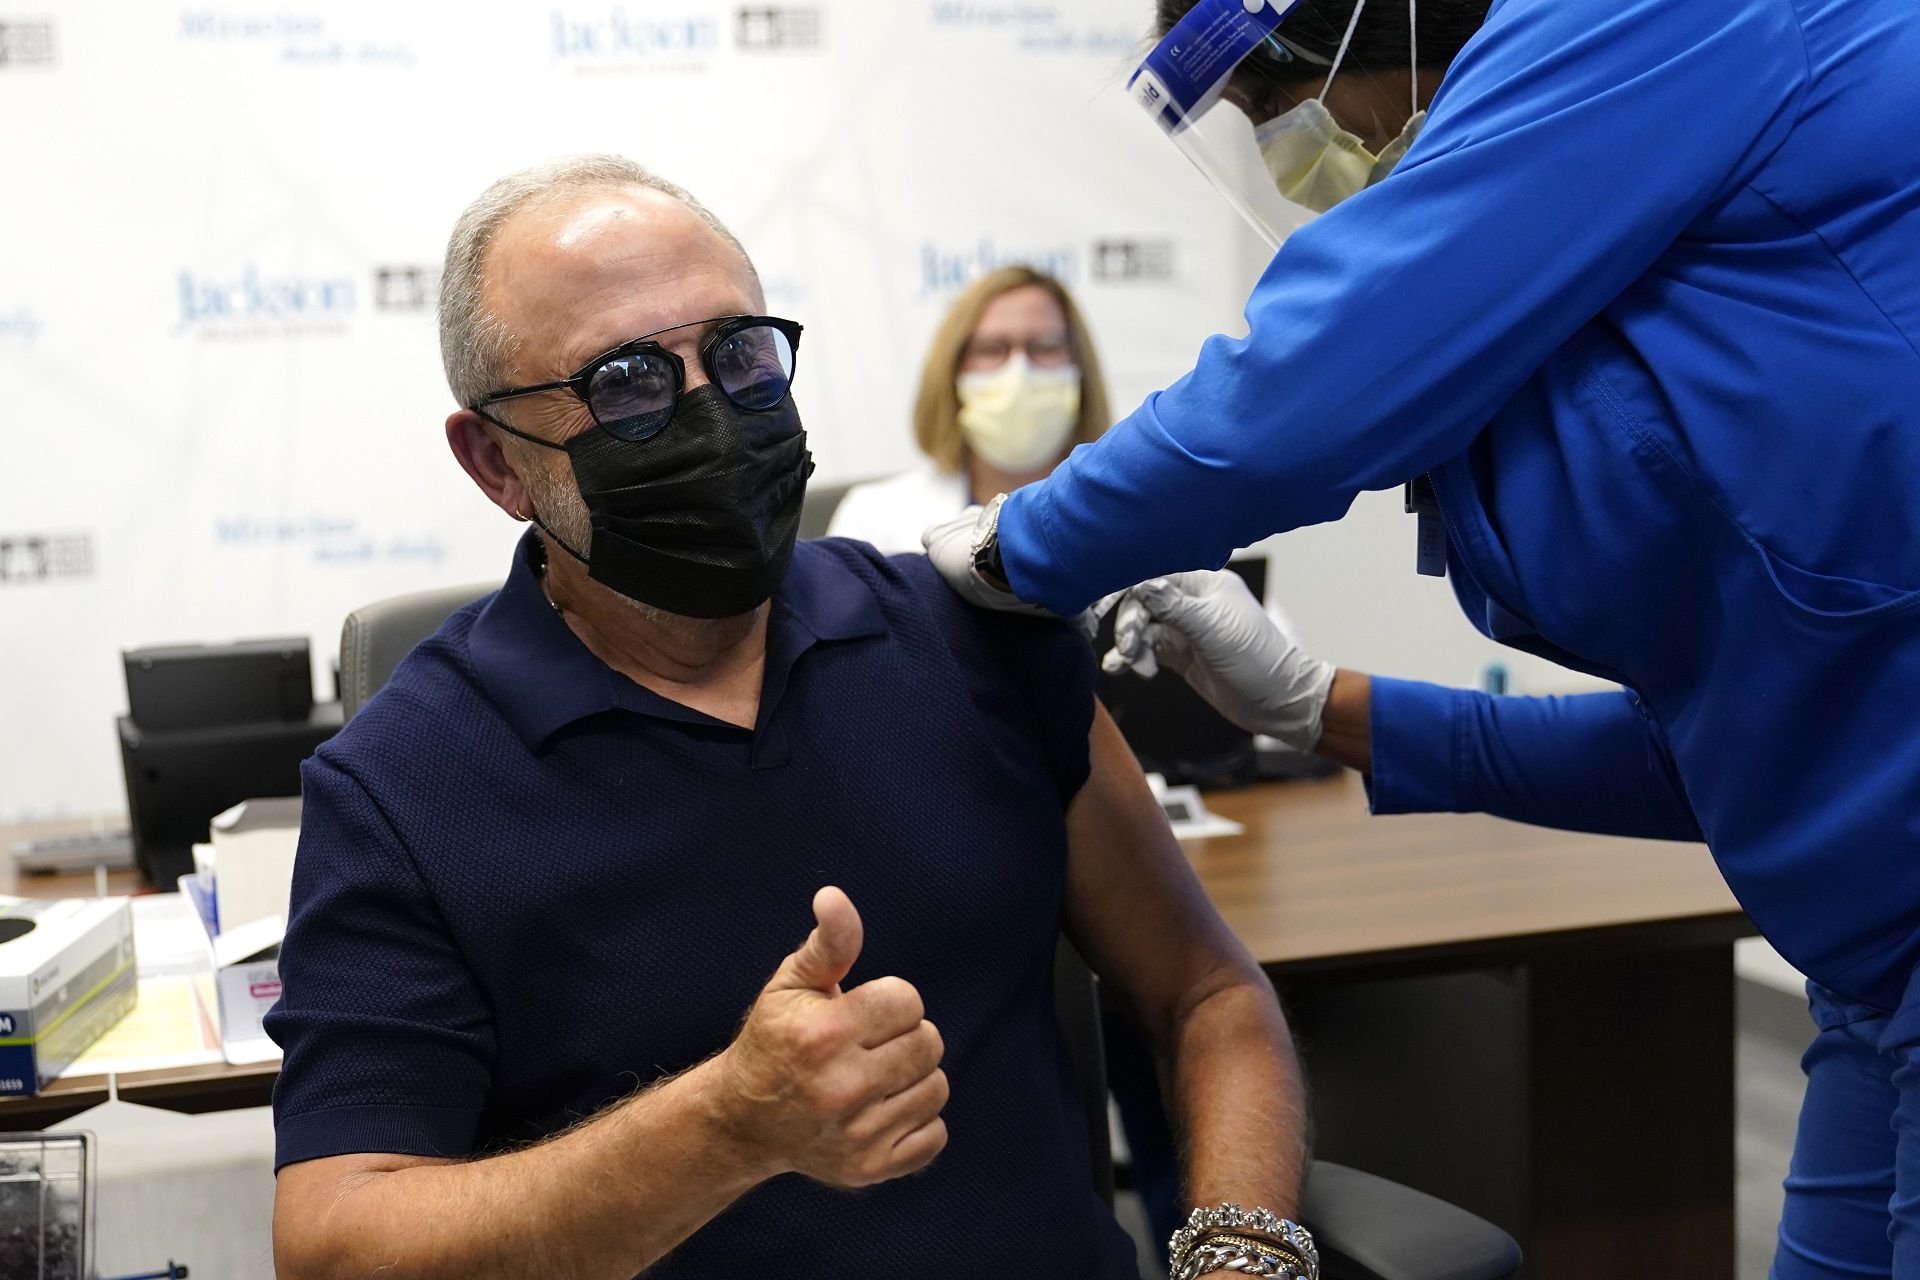 Music producer Emilio Estefan, 67, gives the thumbs-up while he receives the Pfizer-BioNTech COVID-19 vaccine at Jackson Memorial Hospital, Wednesday, Dec. 30, 2020, in Miami. Jackson Health System is starting to vaccinate people over the age of 65 this week. (AP Photo/Lynne Sladky)